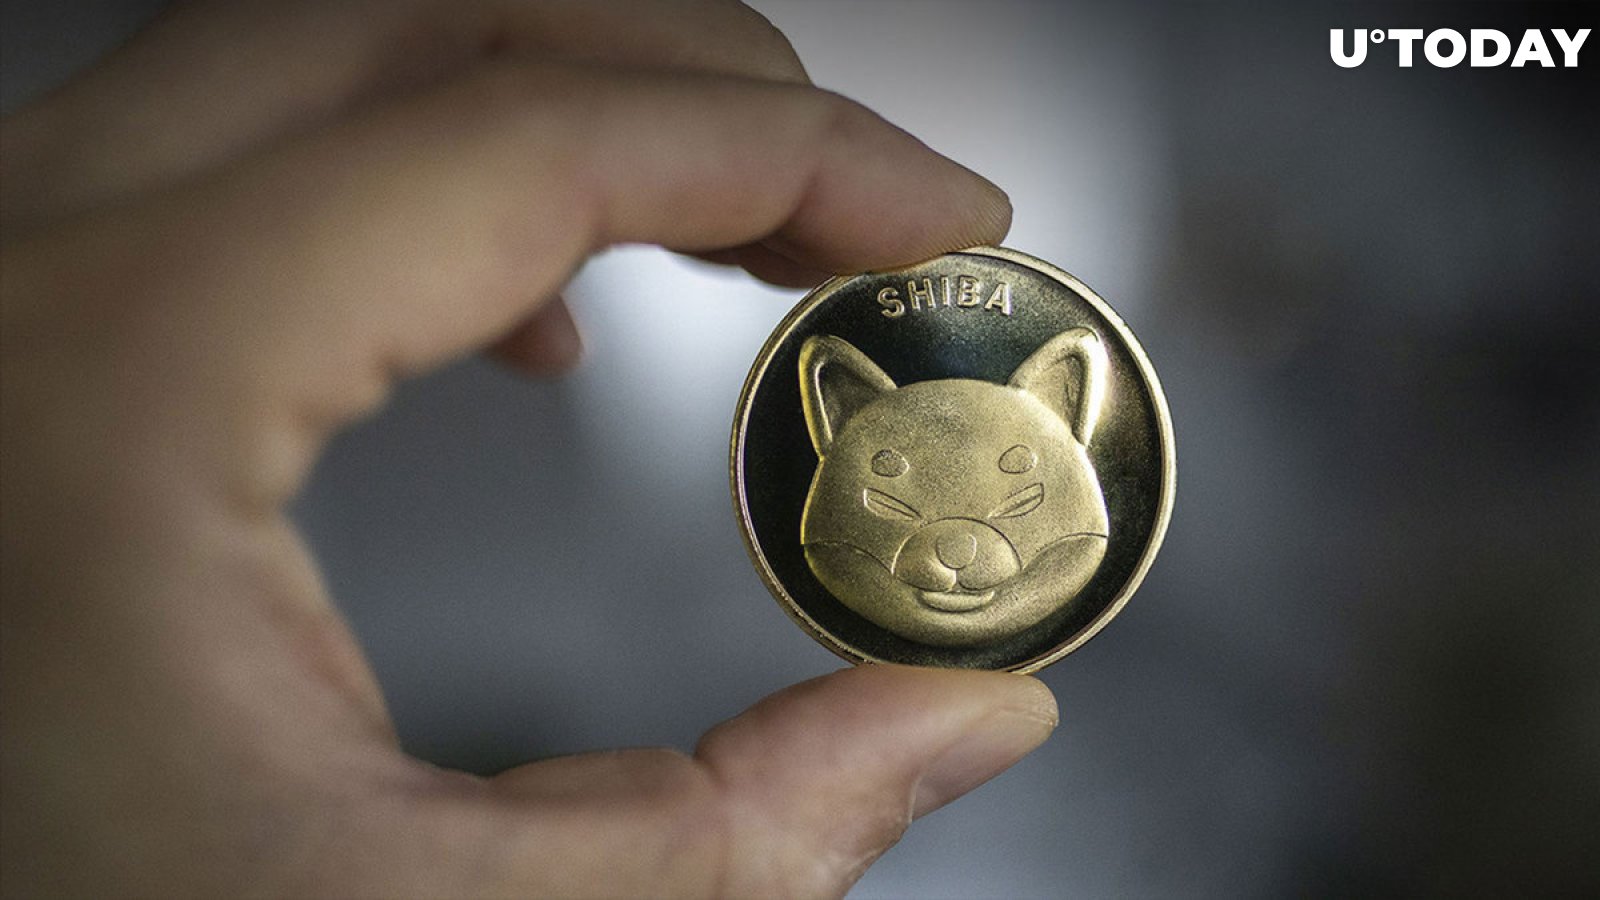 Speculative Shiba Inu (SHIB) Traders Are Dropping Their Holdings, 65% of Holders Are Long Term